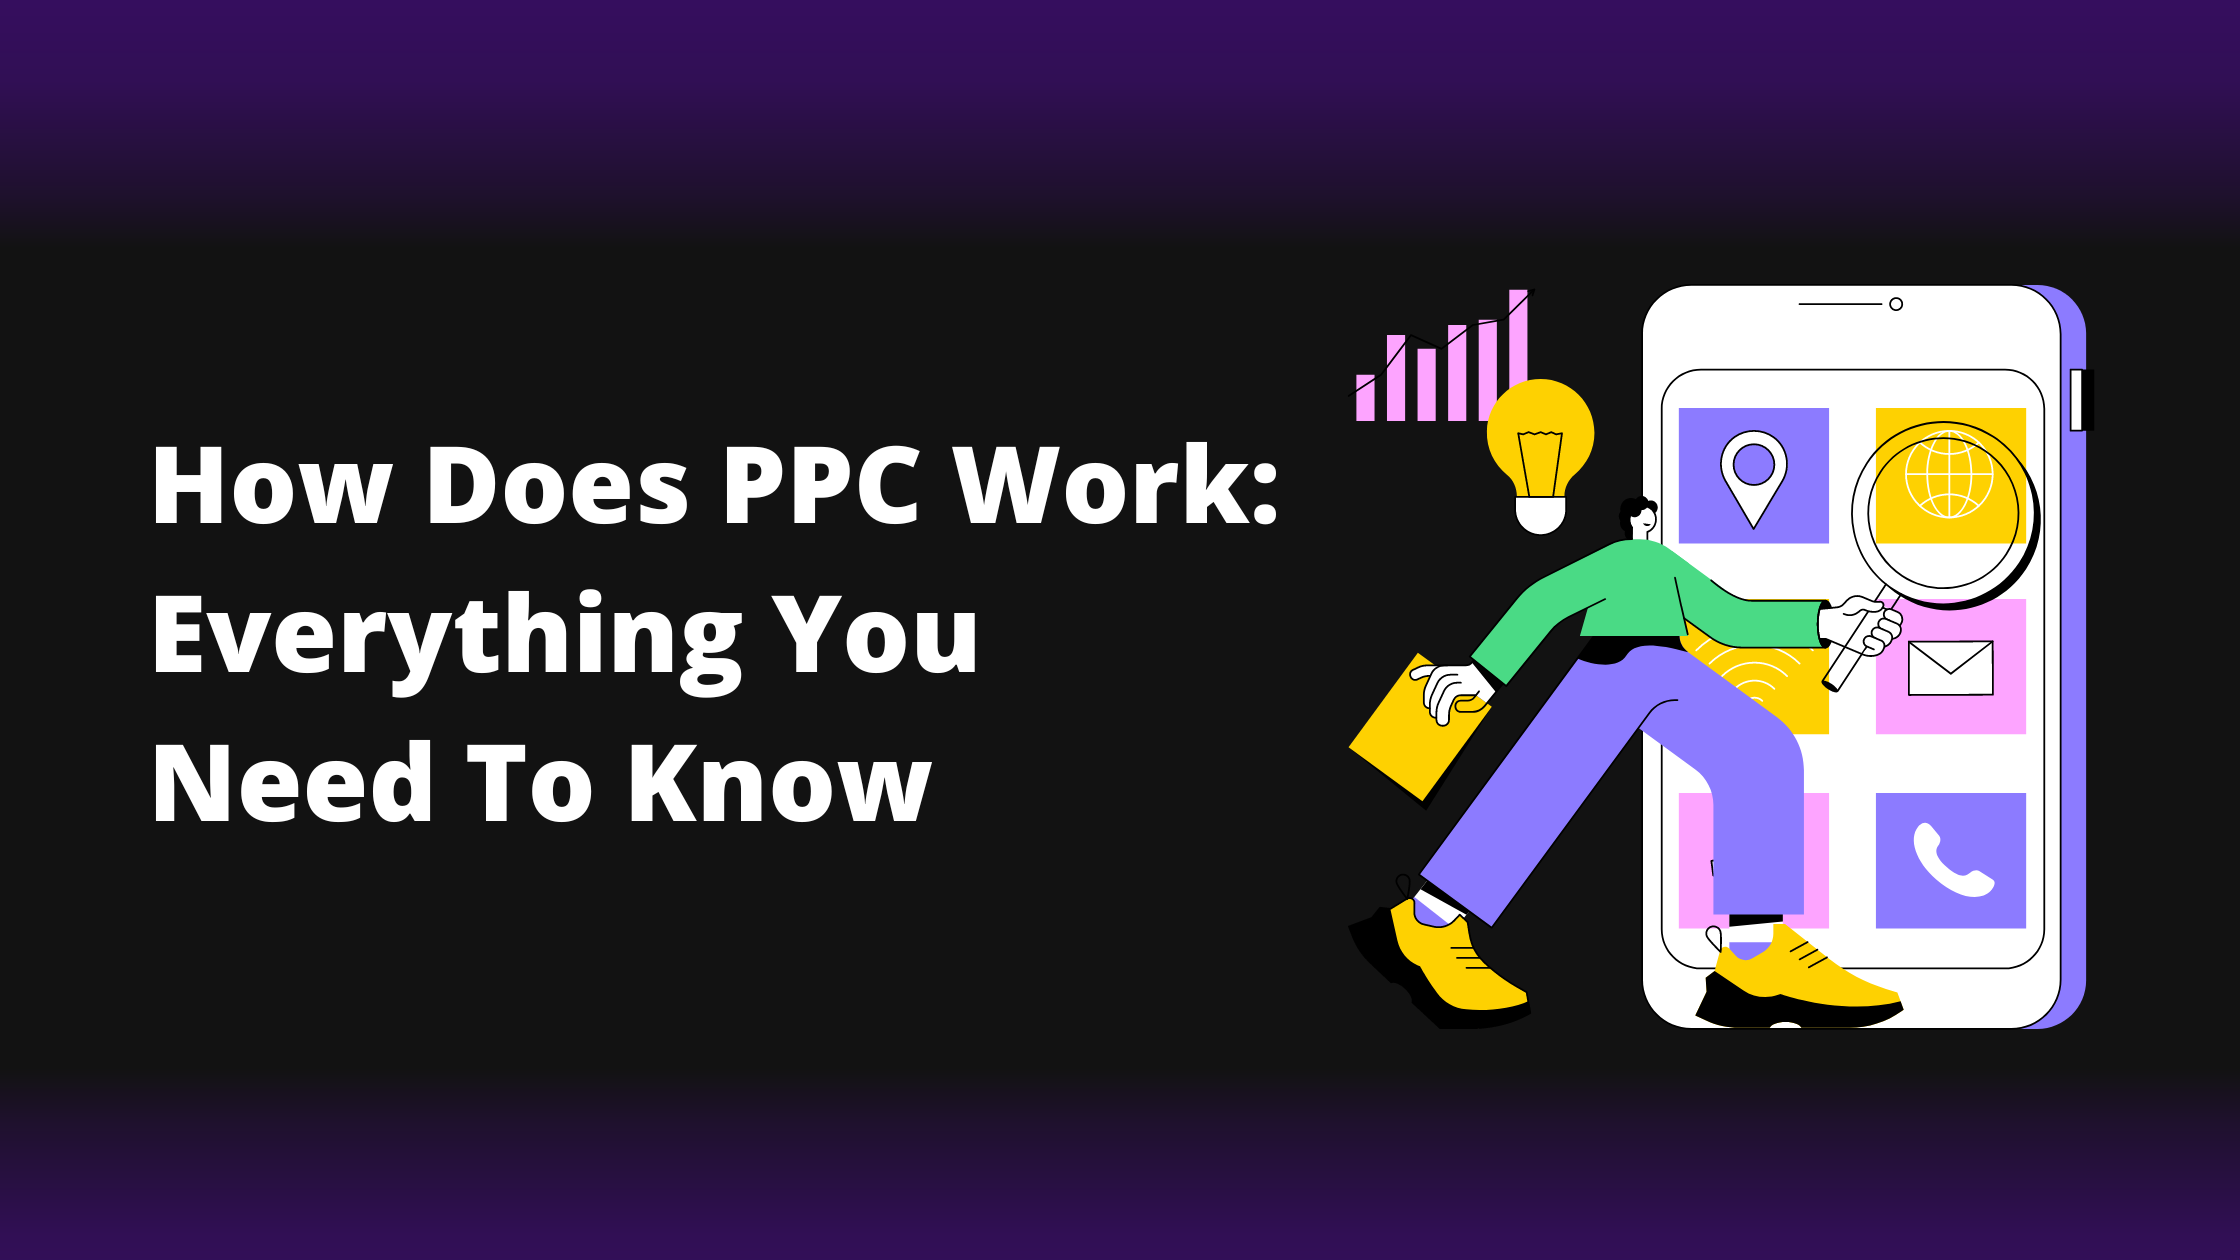 How Does PPC Work: Everything You Need To Know